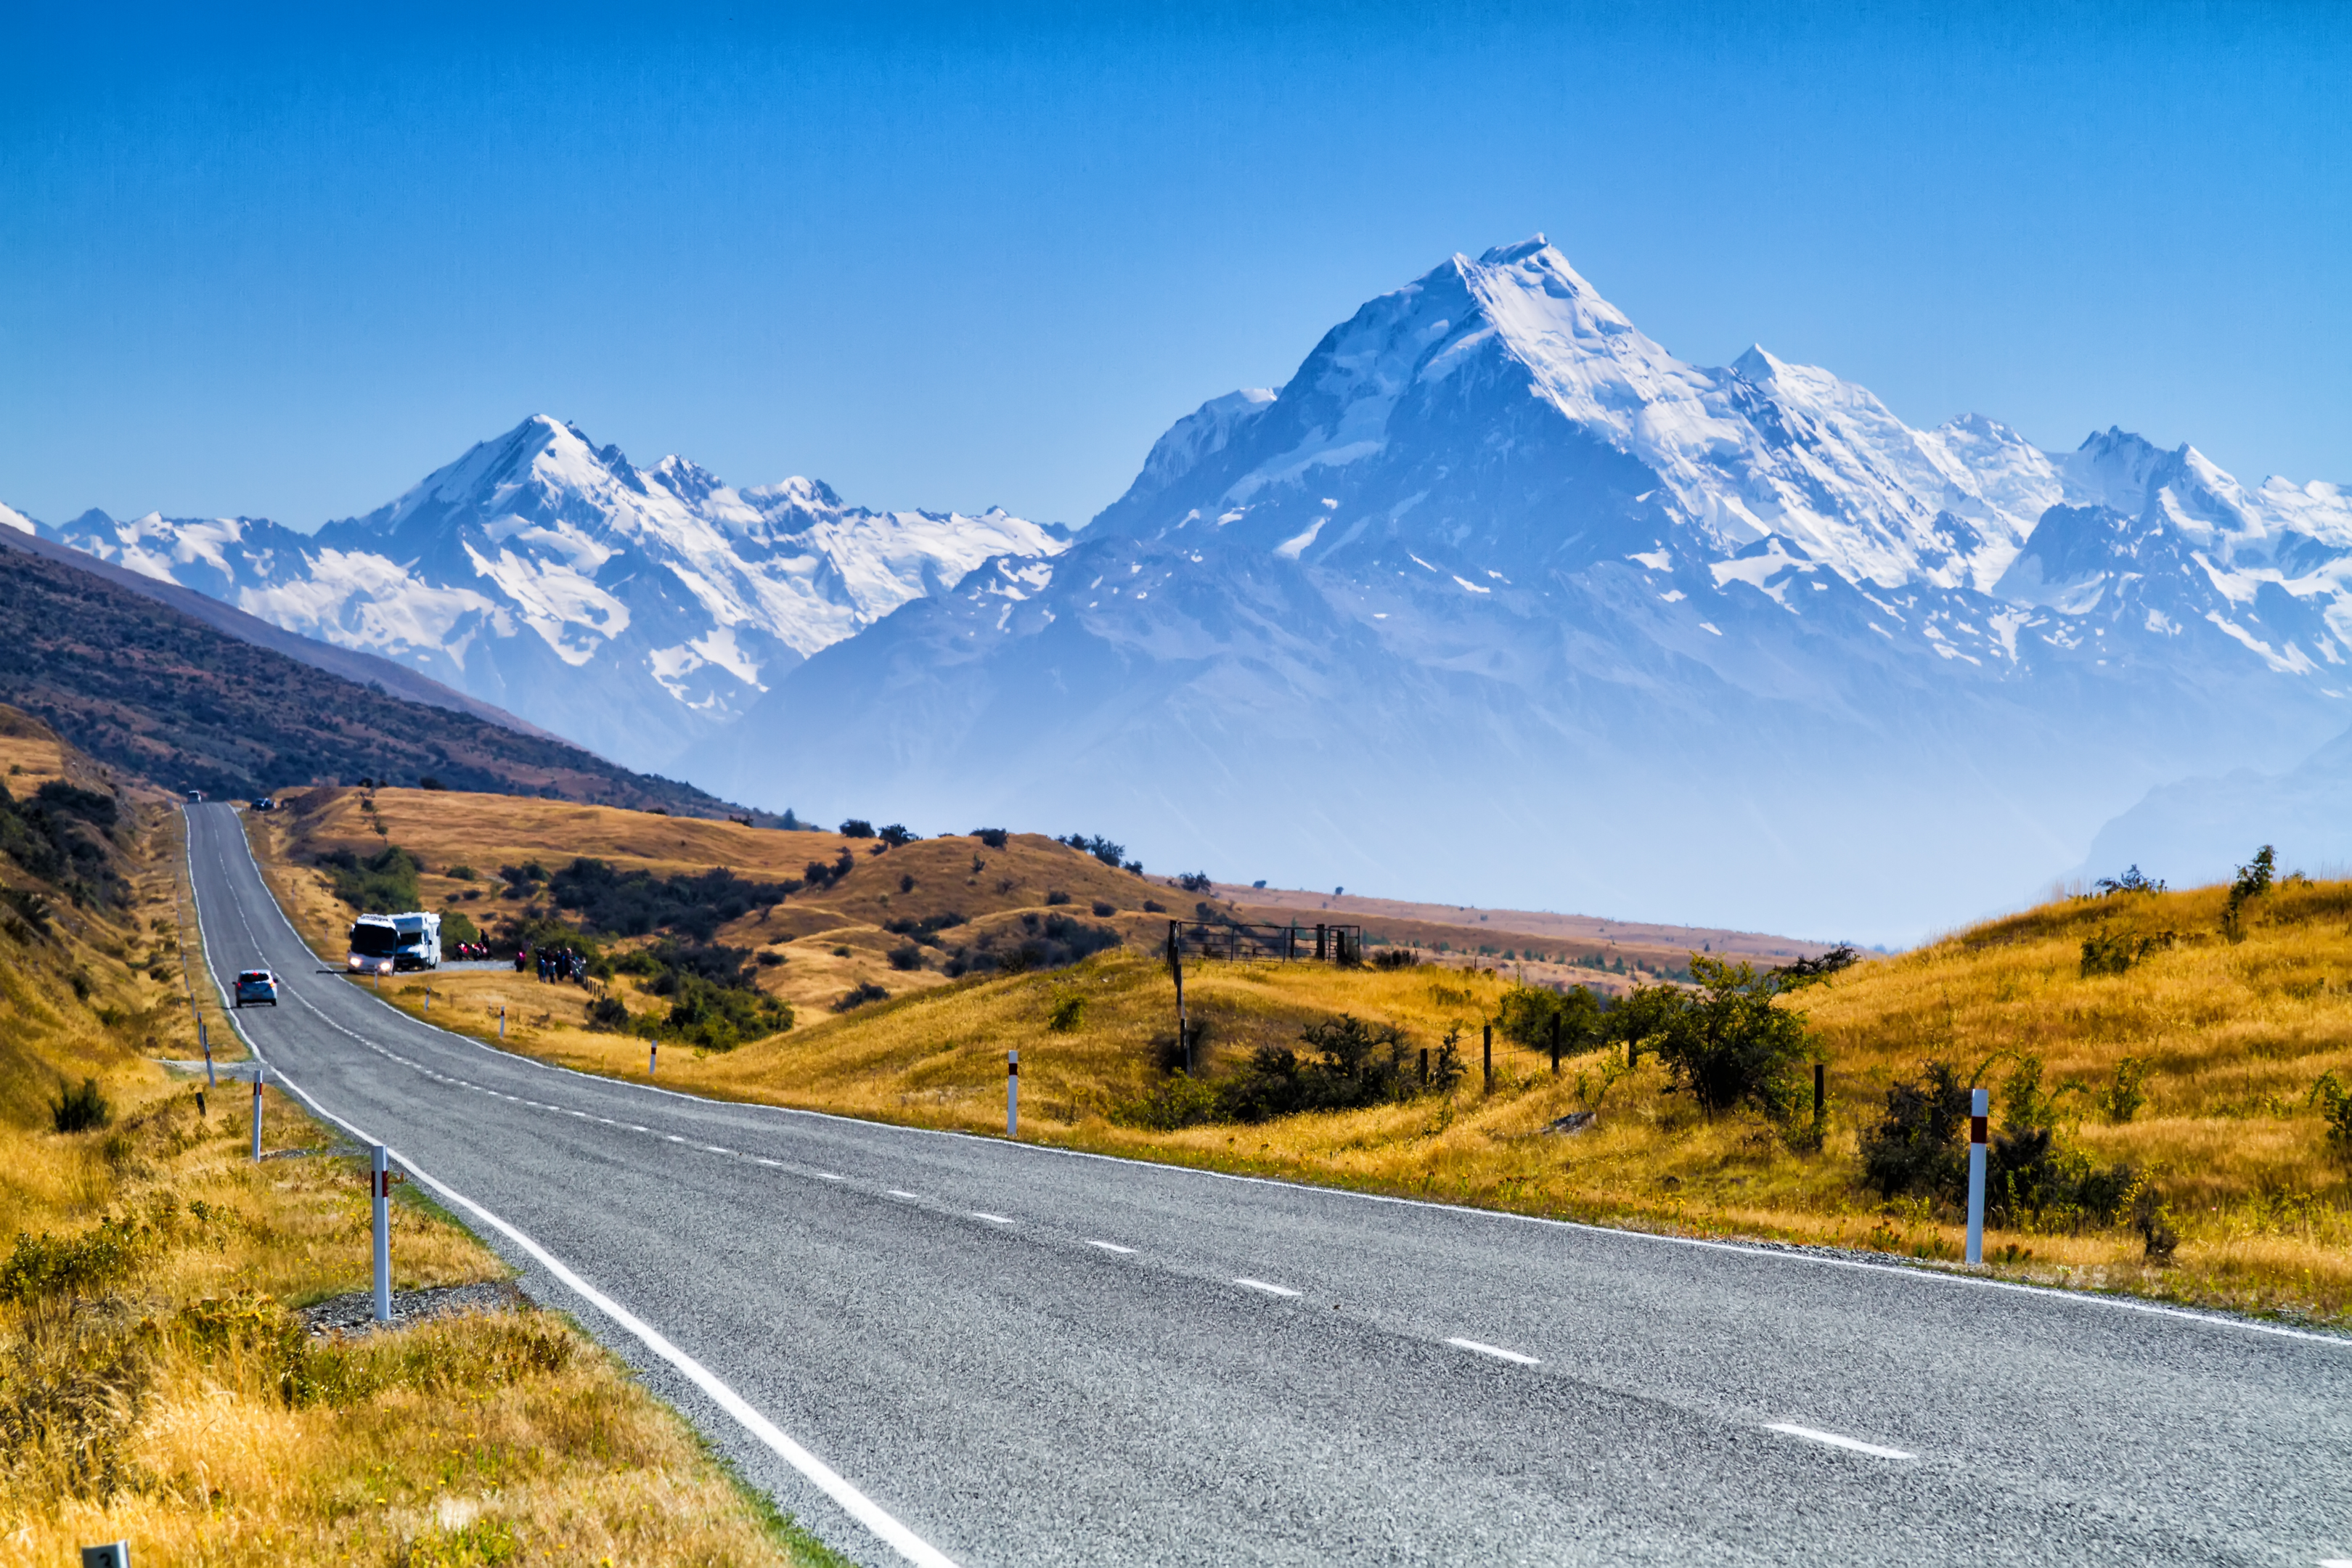 View of the majestic Aoraki Mount Cook with the road leading to Mount Cook Village, New Zealand